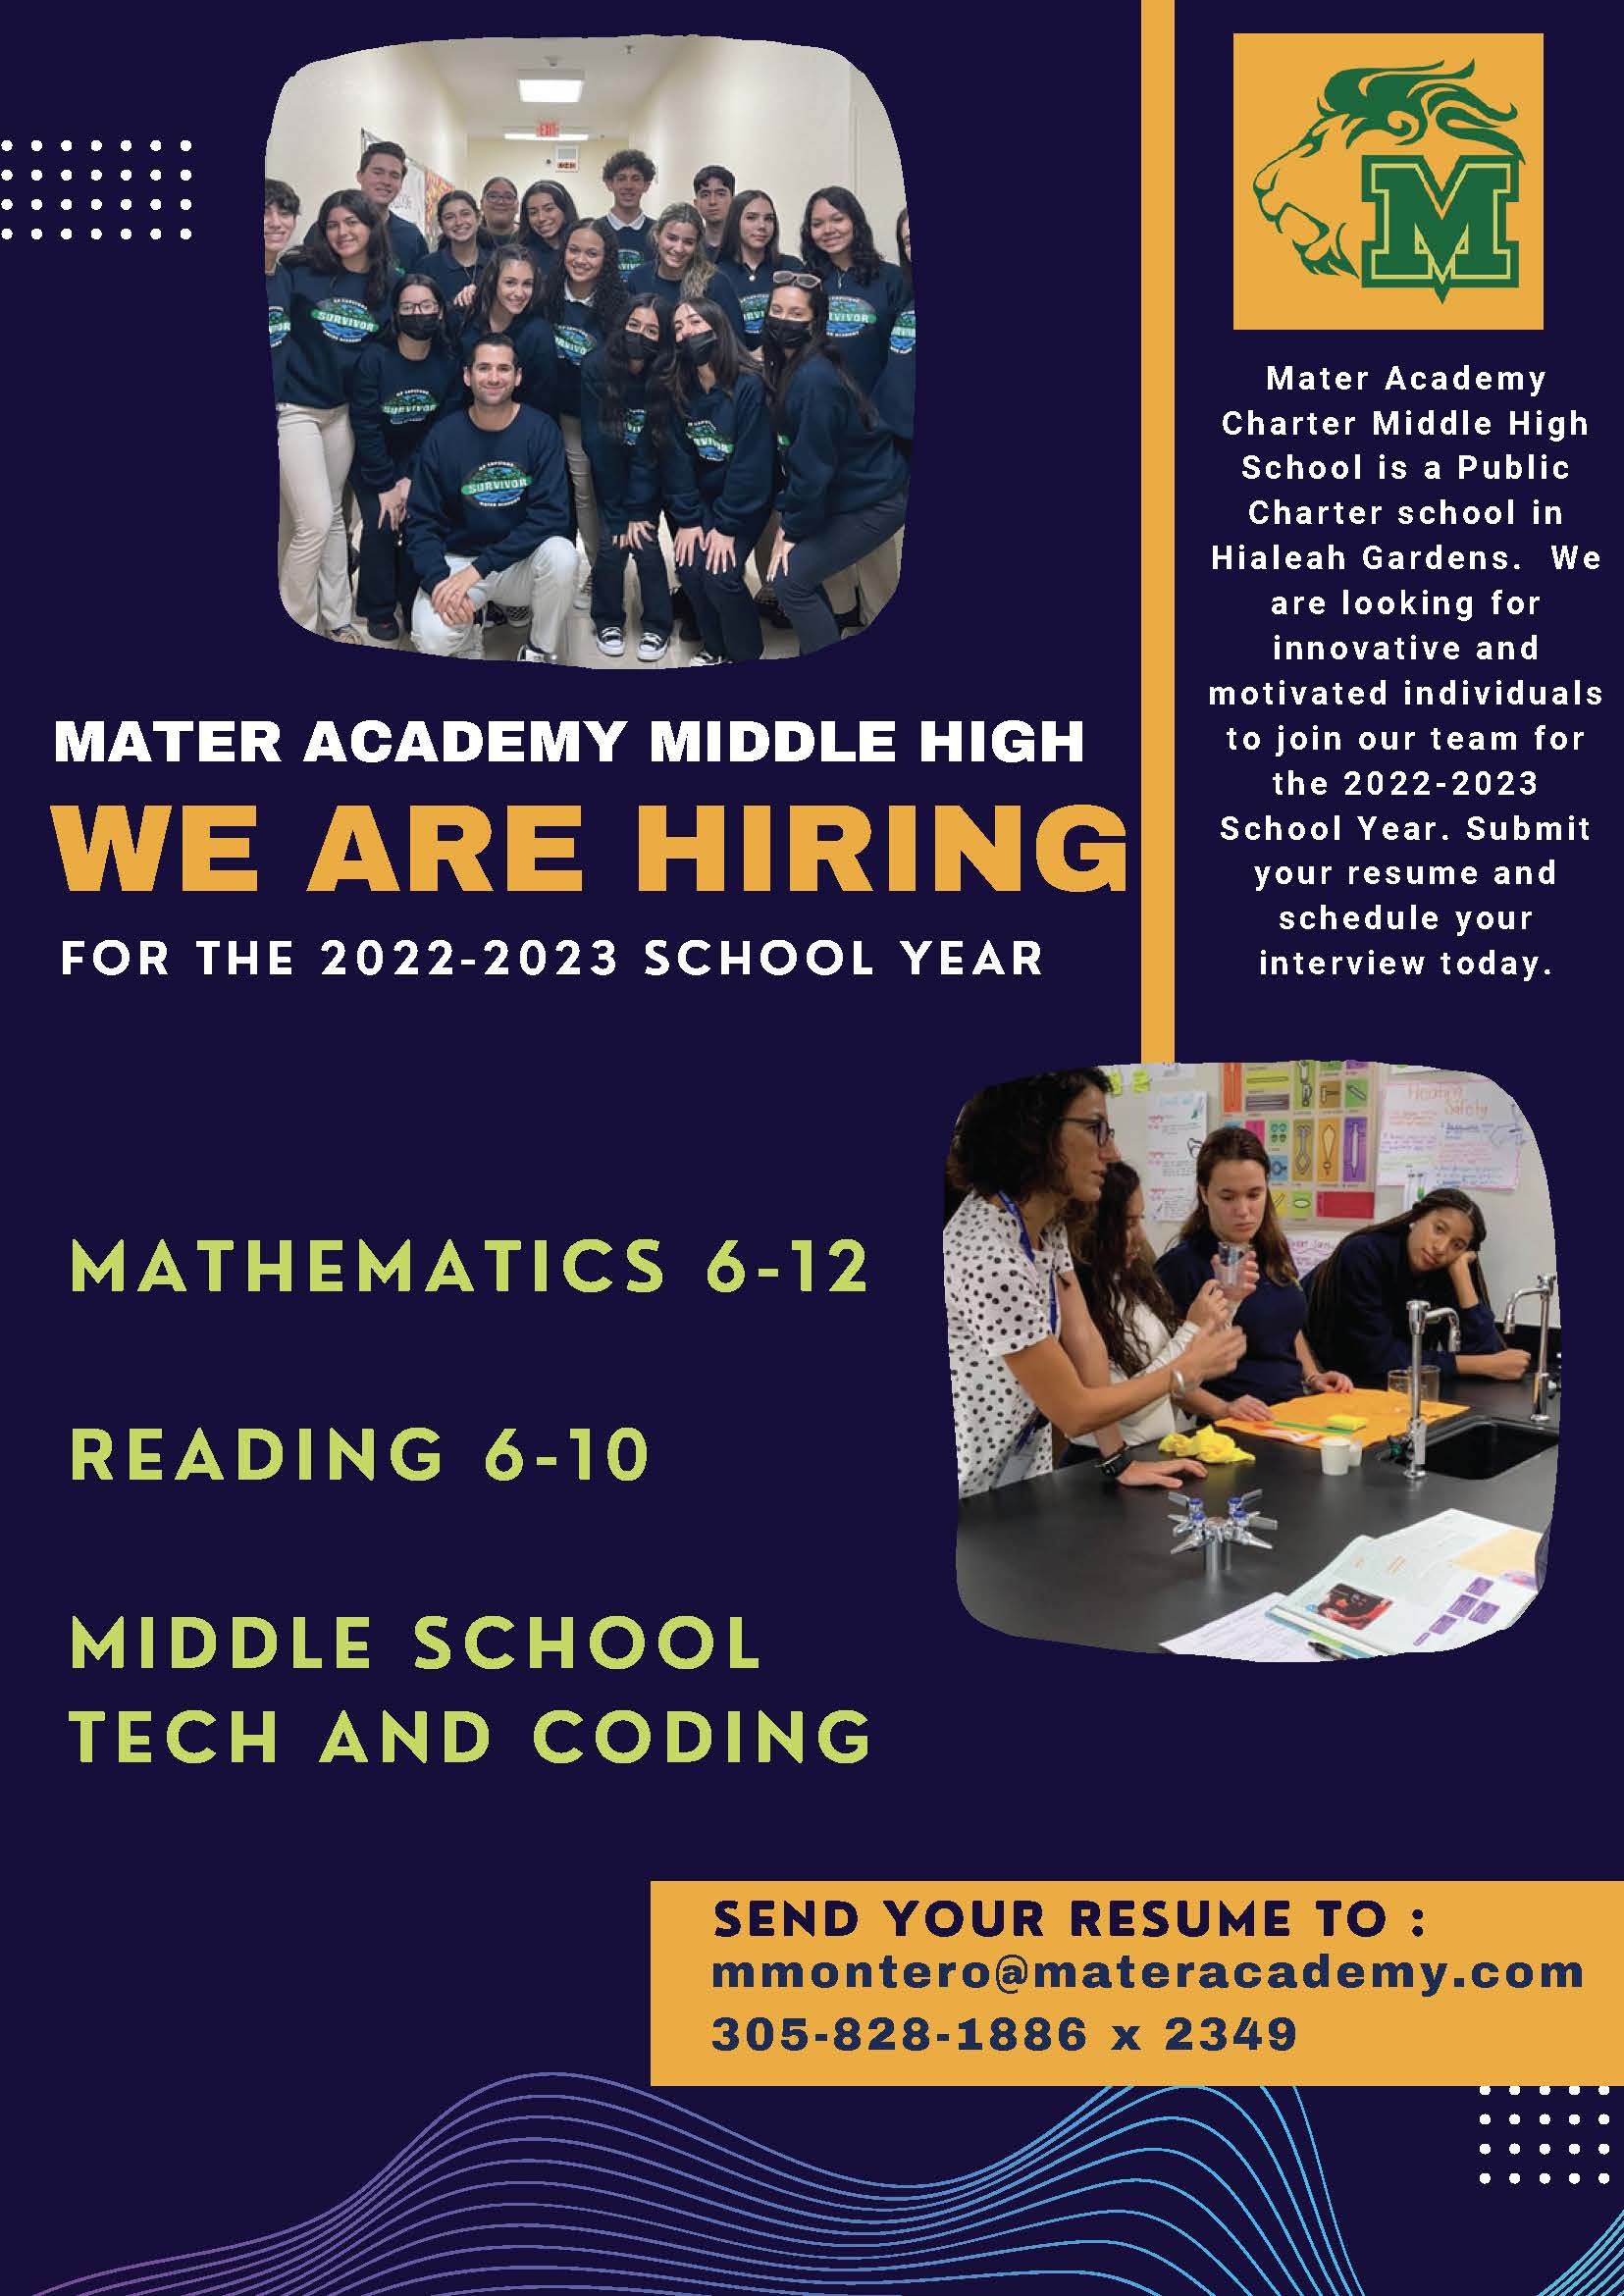 Mater Academy Middle High - Hiring Flyer for 2022-2023